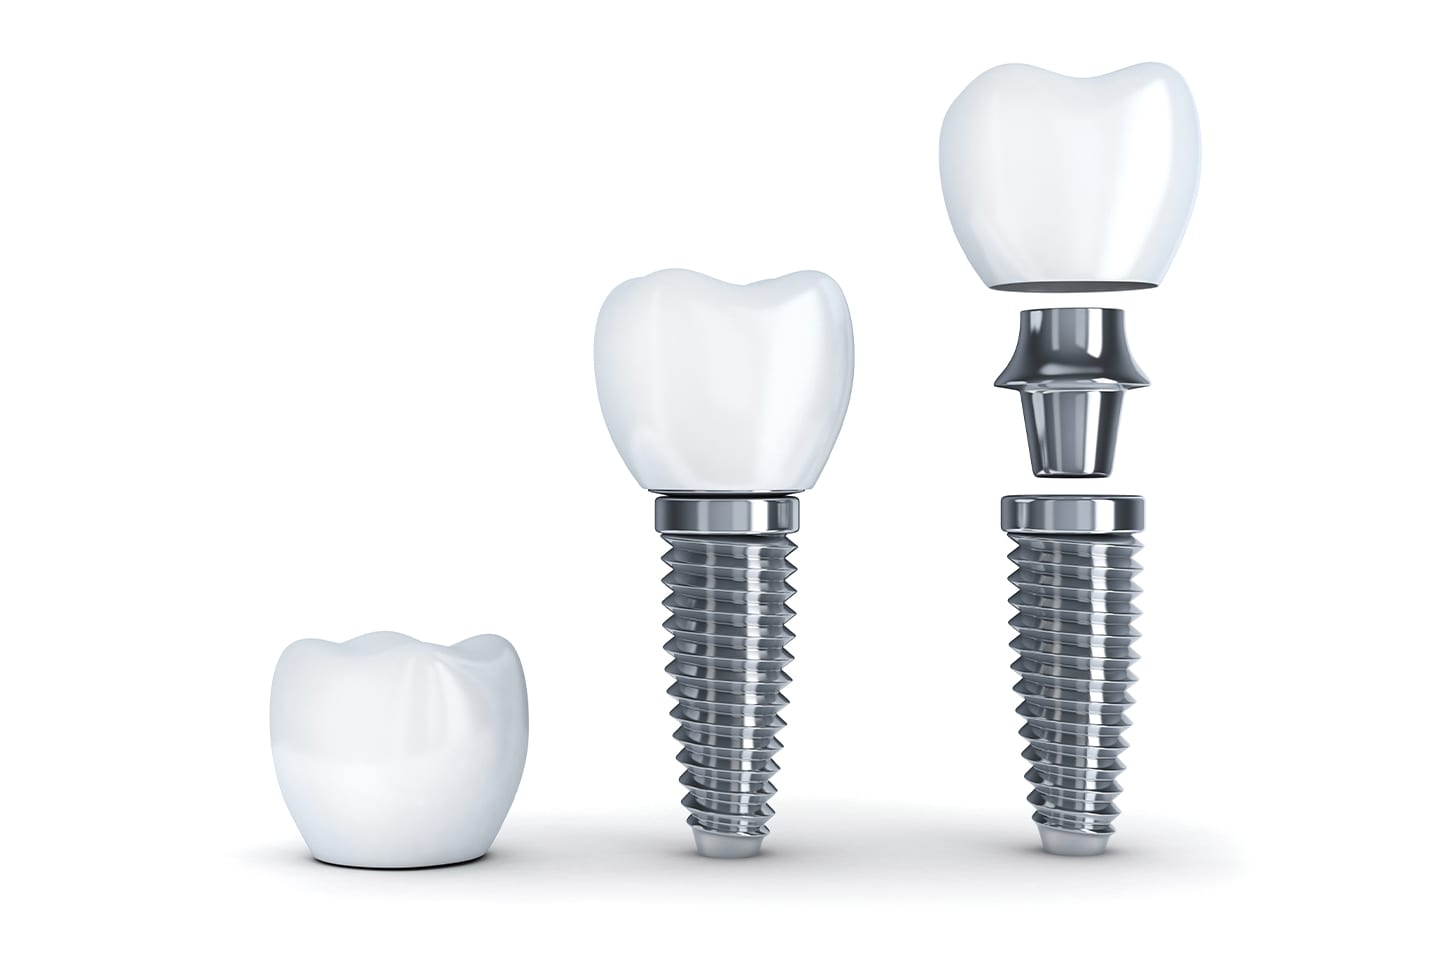 deconstructed dental tooth implants oral health chattanooga